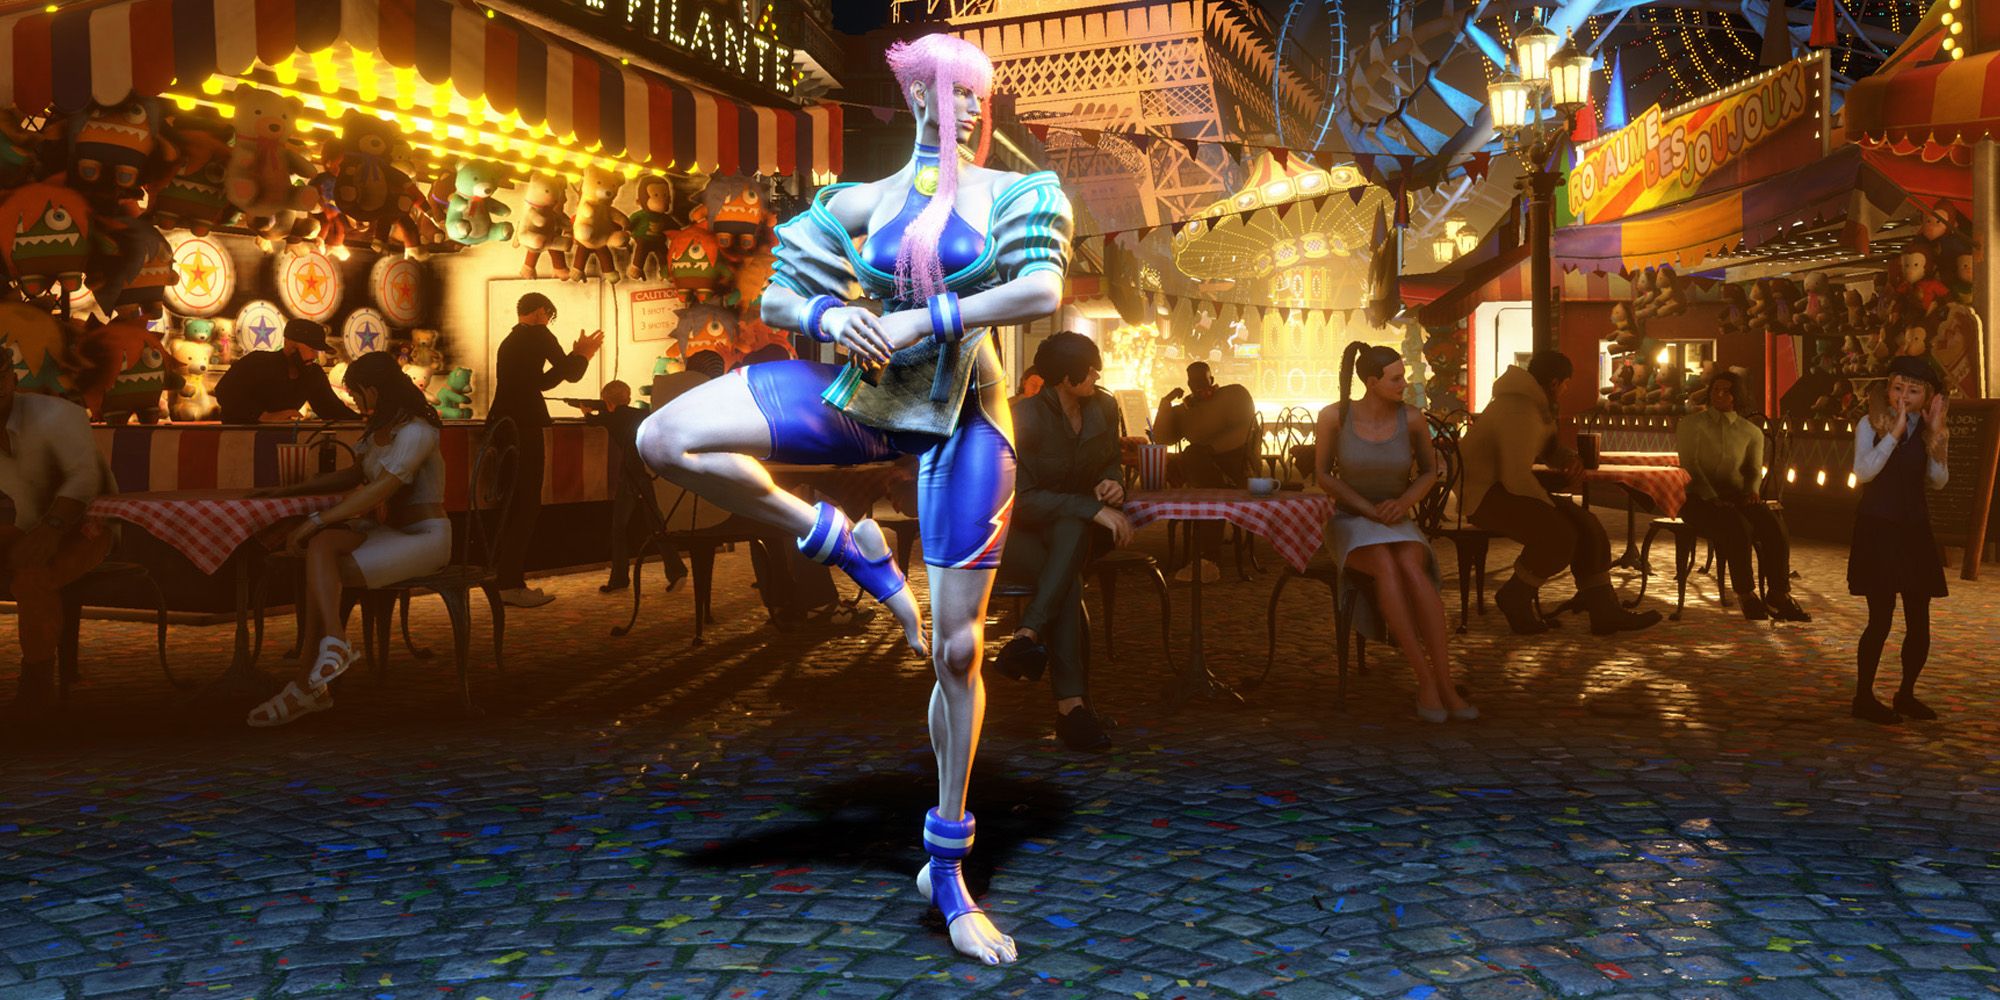 New Street Fighter 6 Character Manon with pink hair and an athletic outfit posing on one foot in a street market.